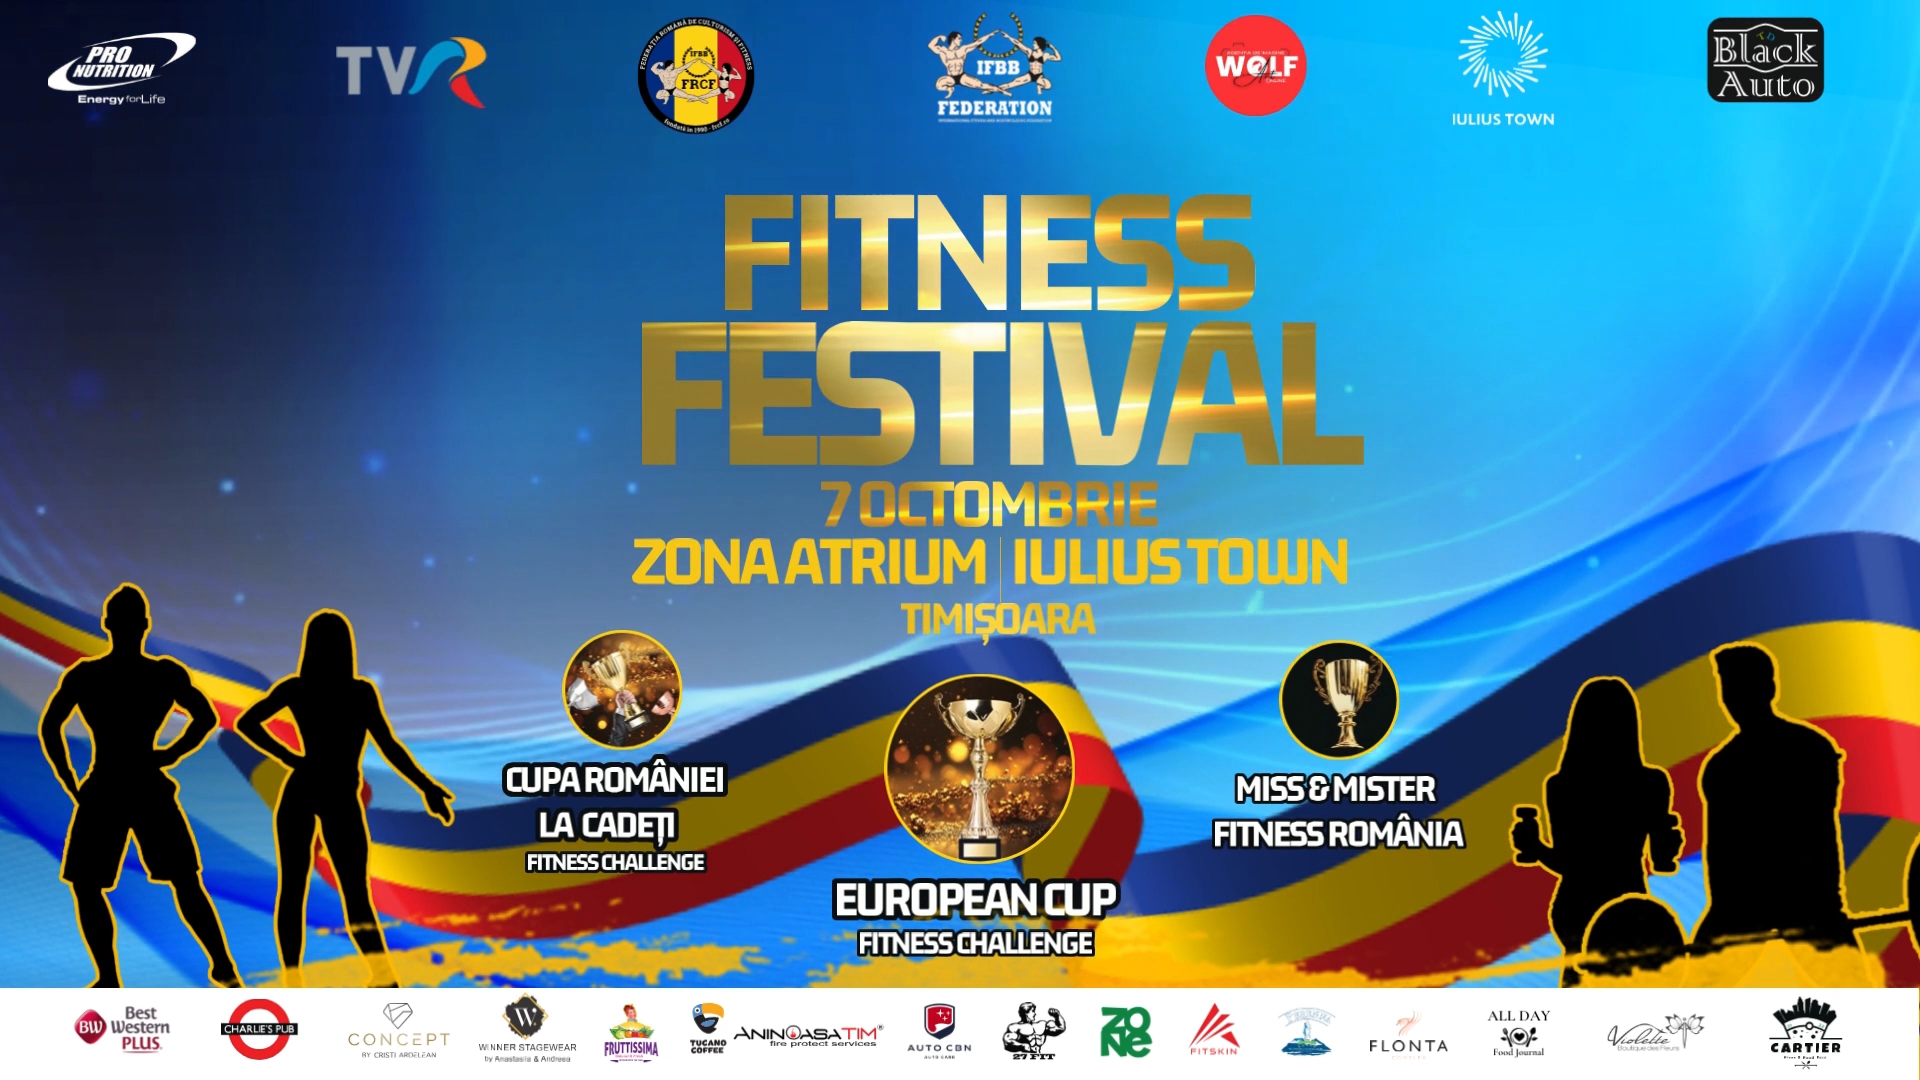 FitnessFestival_1920x1080.png